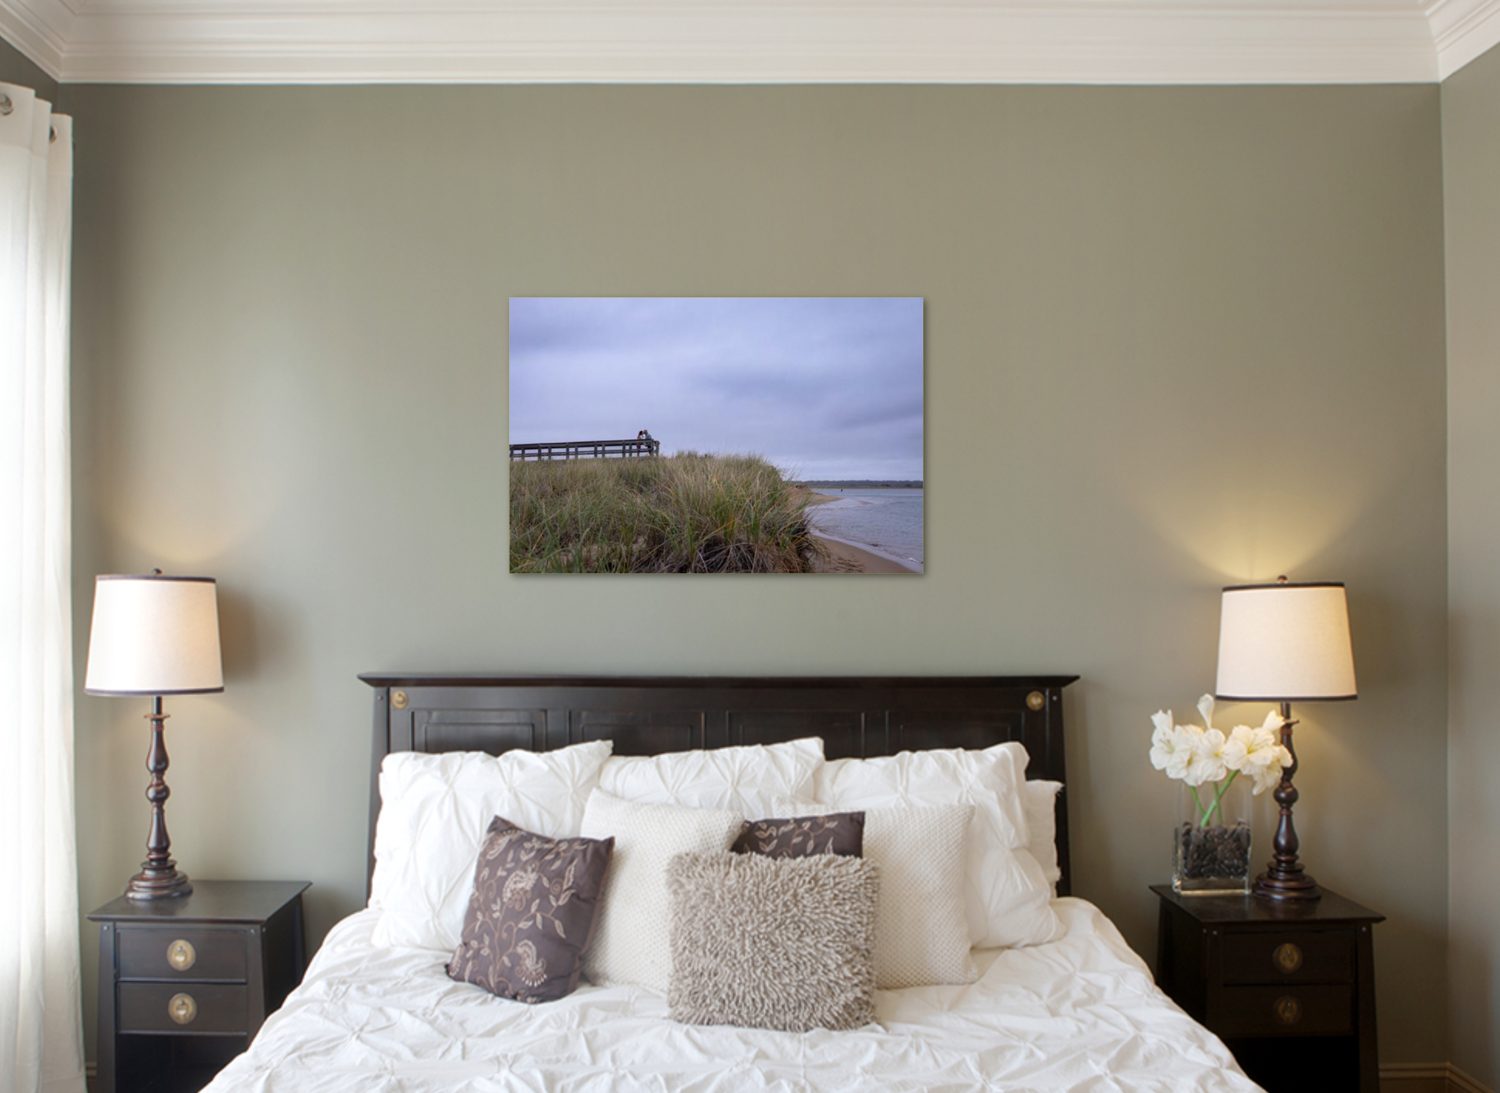 Wall art sample of couple on beach in a bedroom setting